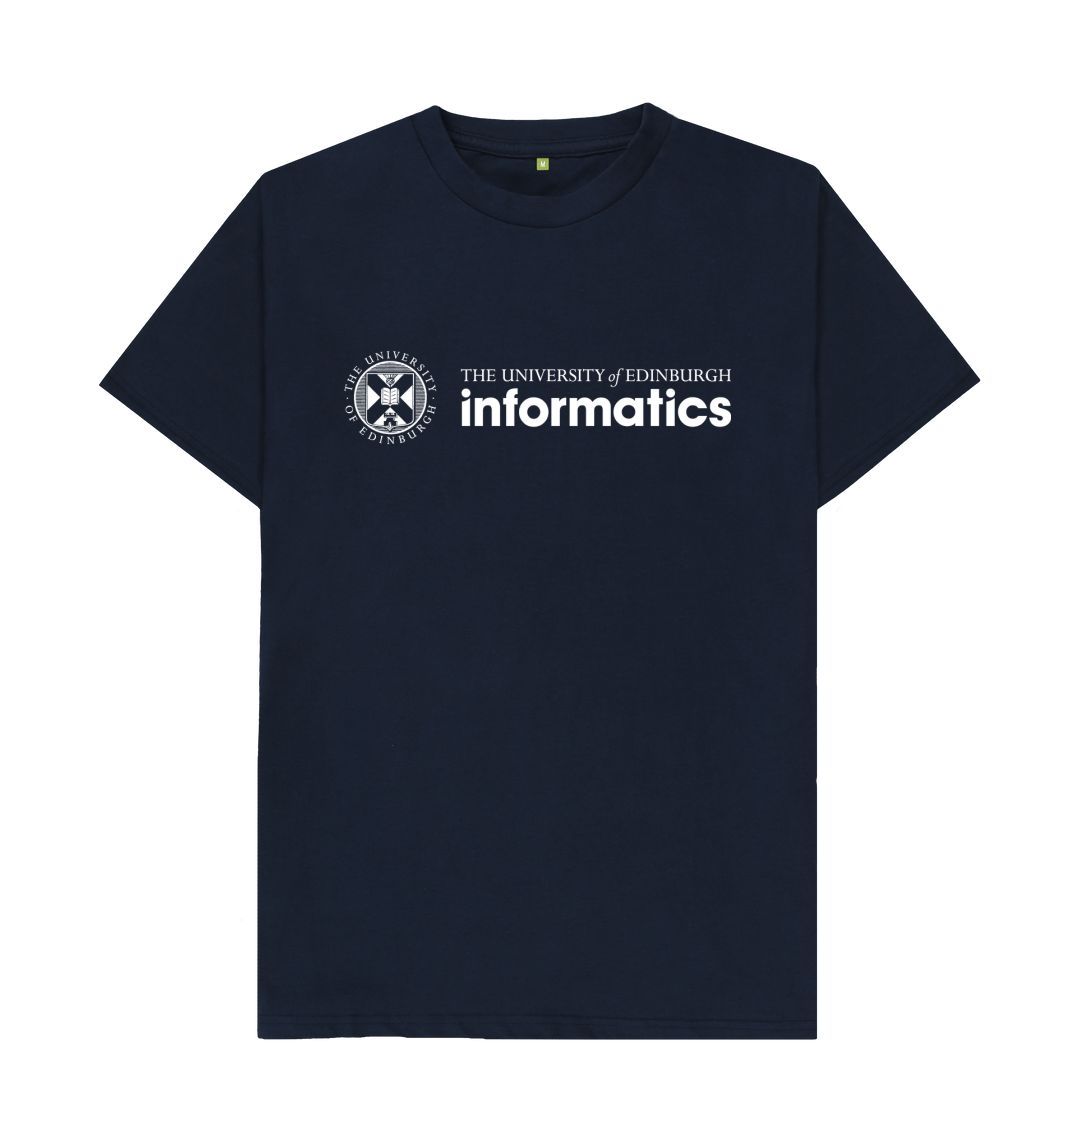 Navy T Shirt with white University crest and text that reads ' University of Edinburgh: Informatics'